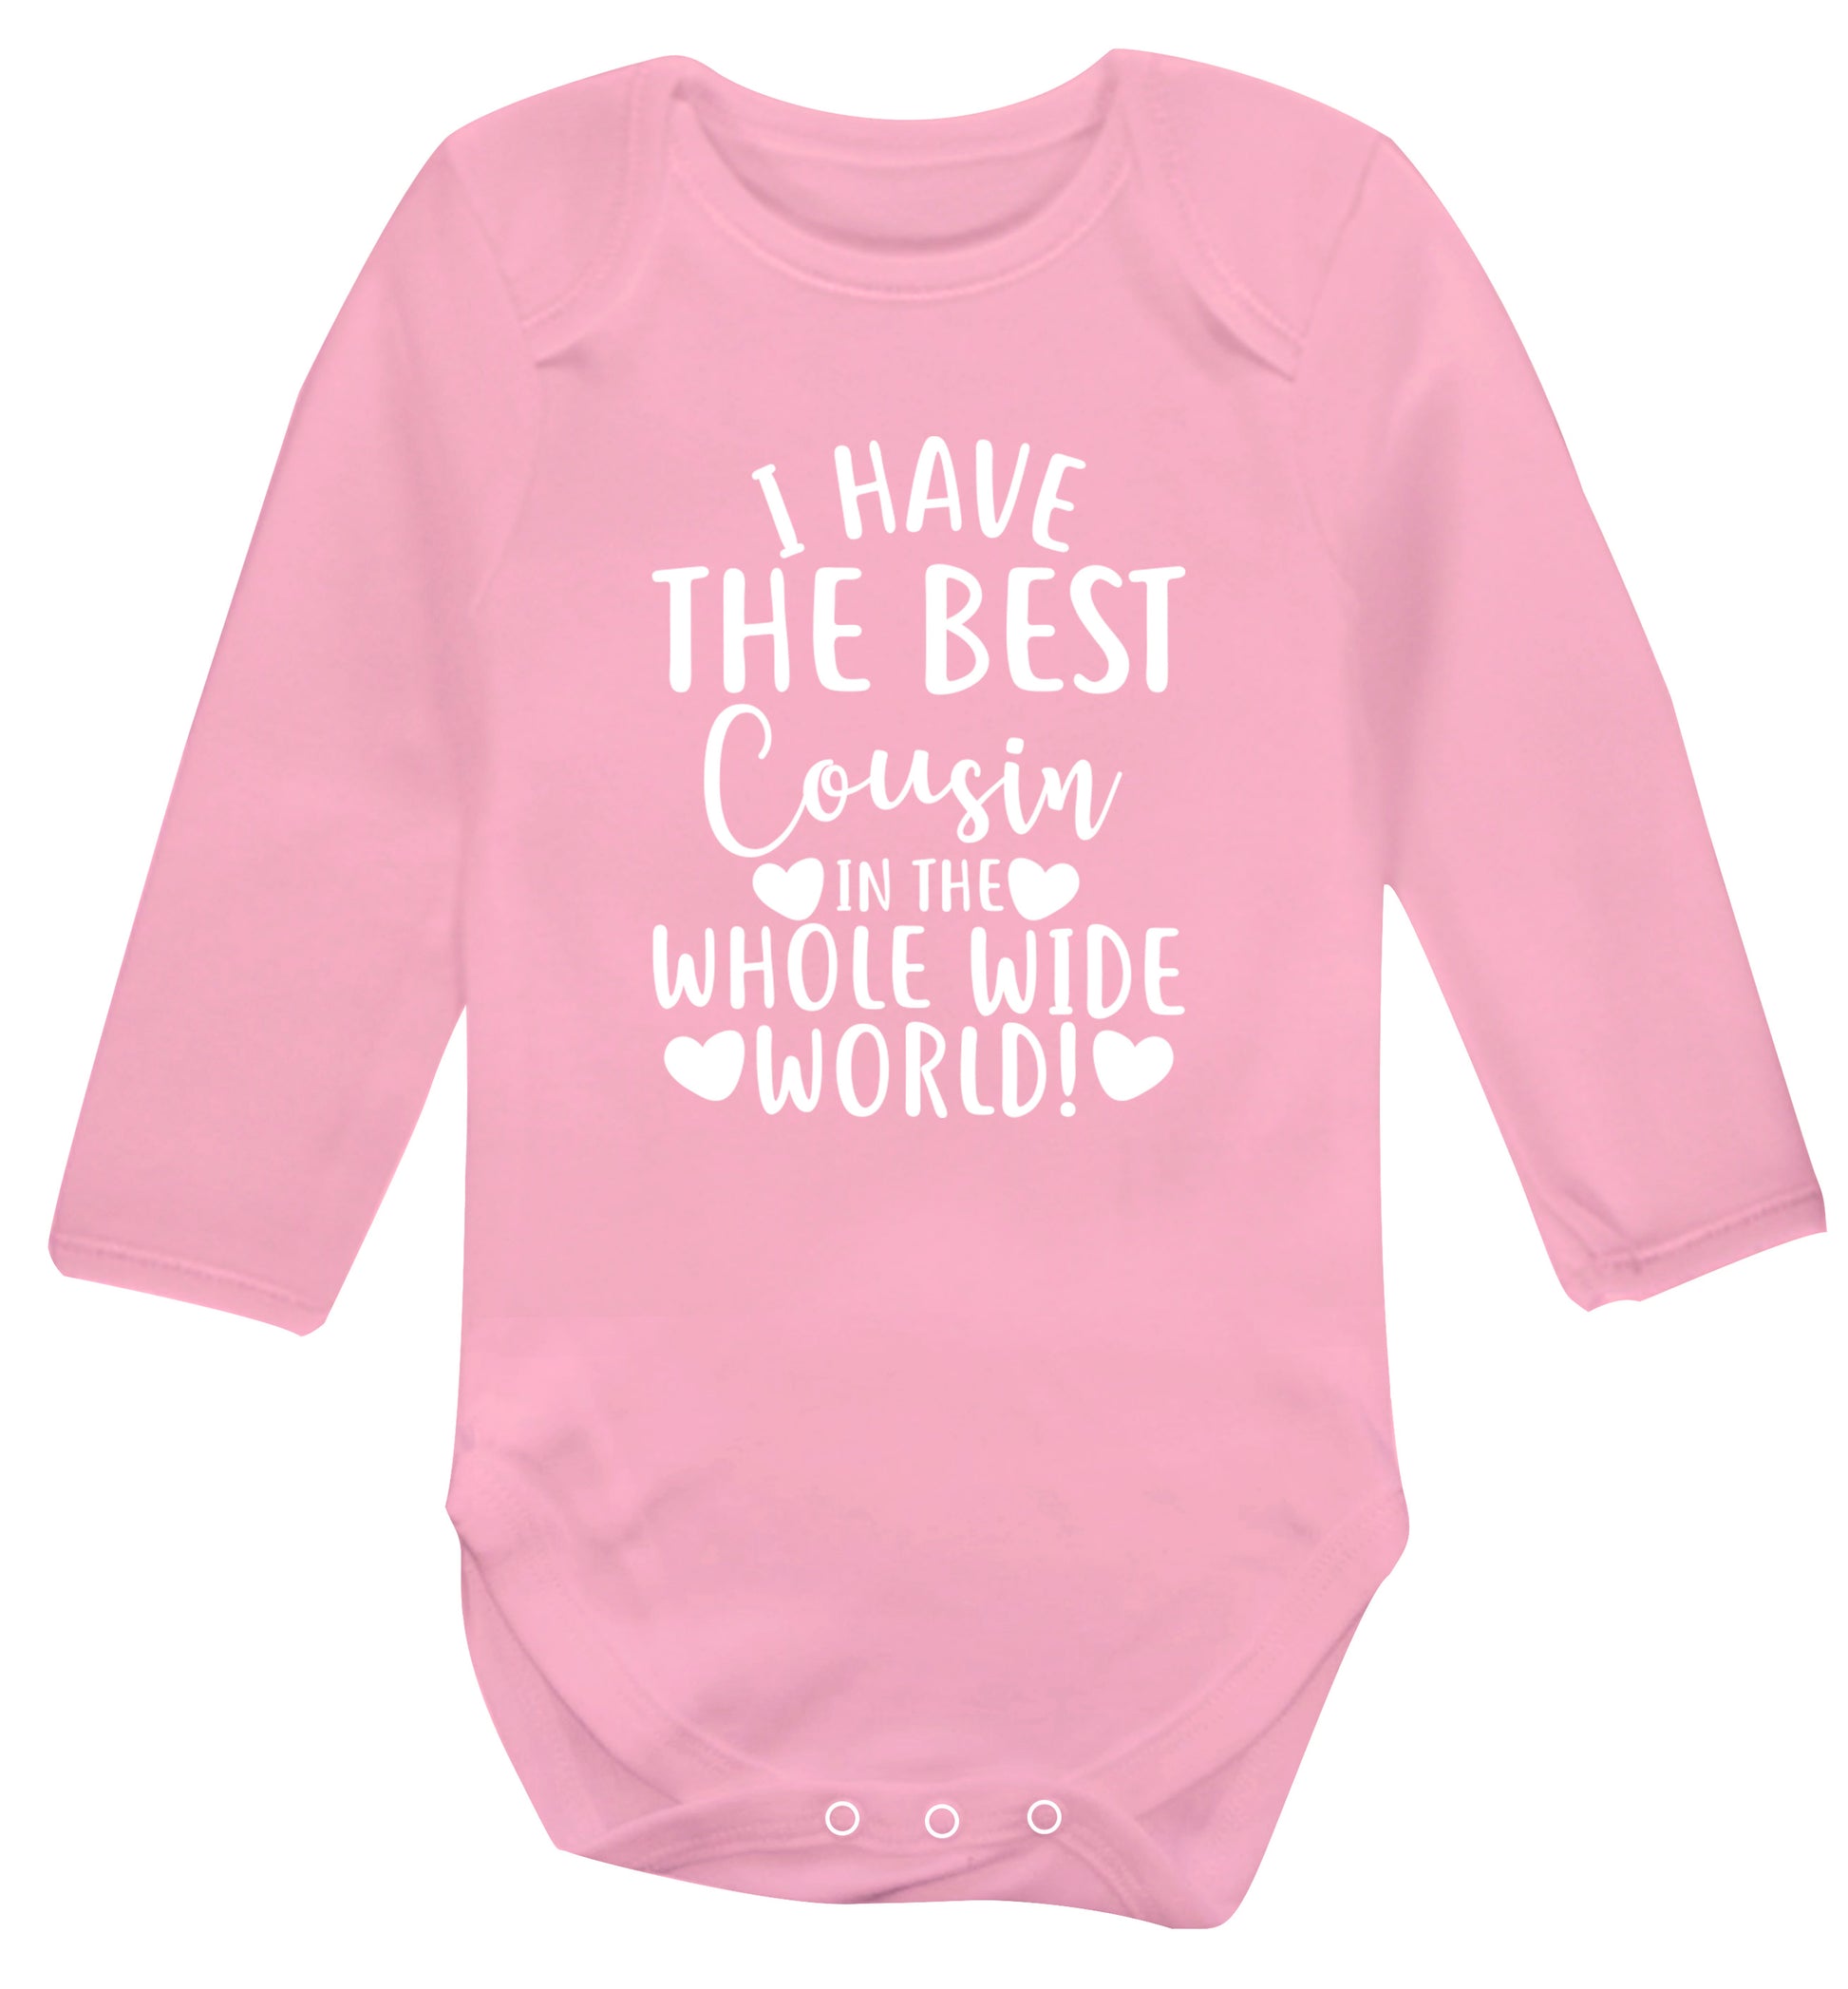 I have the best cousin in the whole wide world! Baby Vest long sleeved pale pink 6-12 months